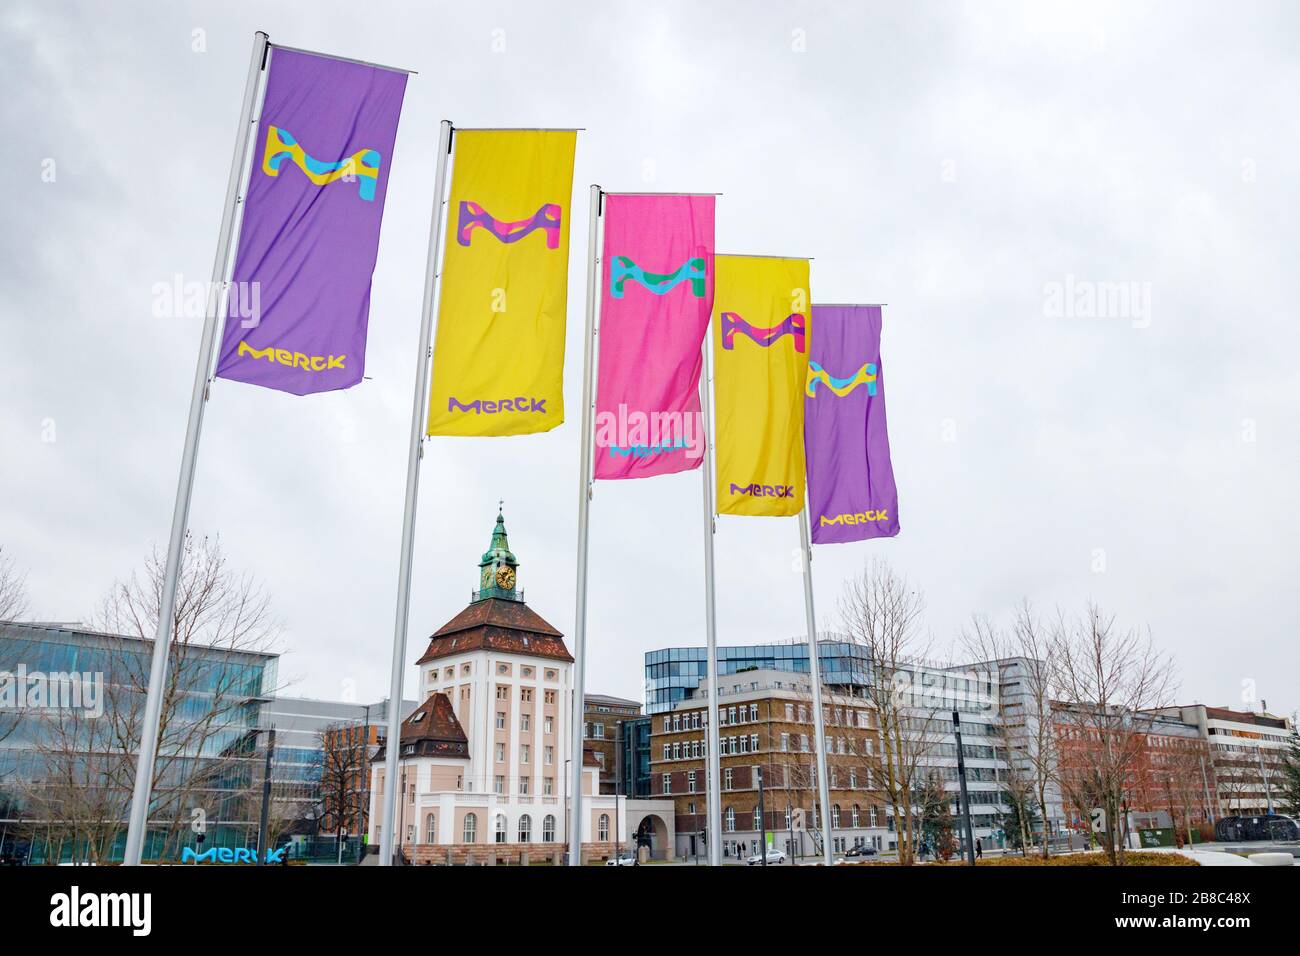 Line of flags with the Merck logo. Merck KGaA is one of the largest pharmaceutical companies in the world. Darmstadt, Germany. Stock Photo